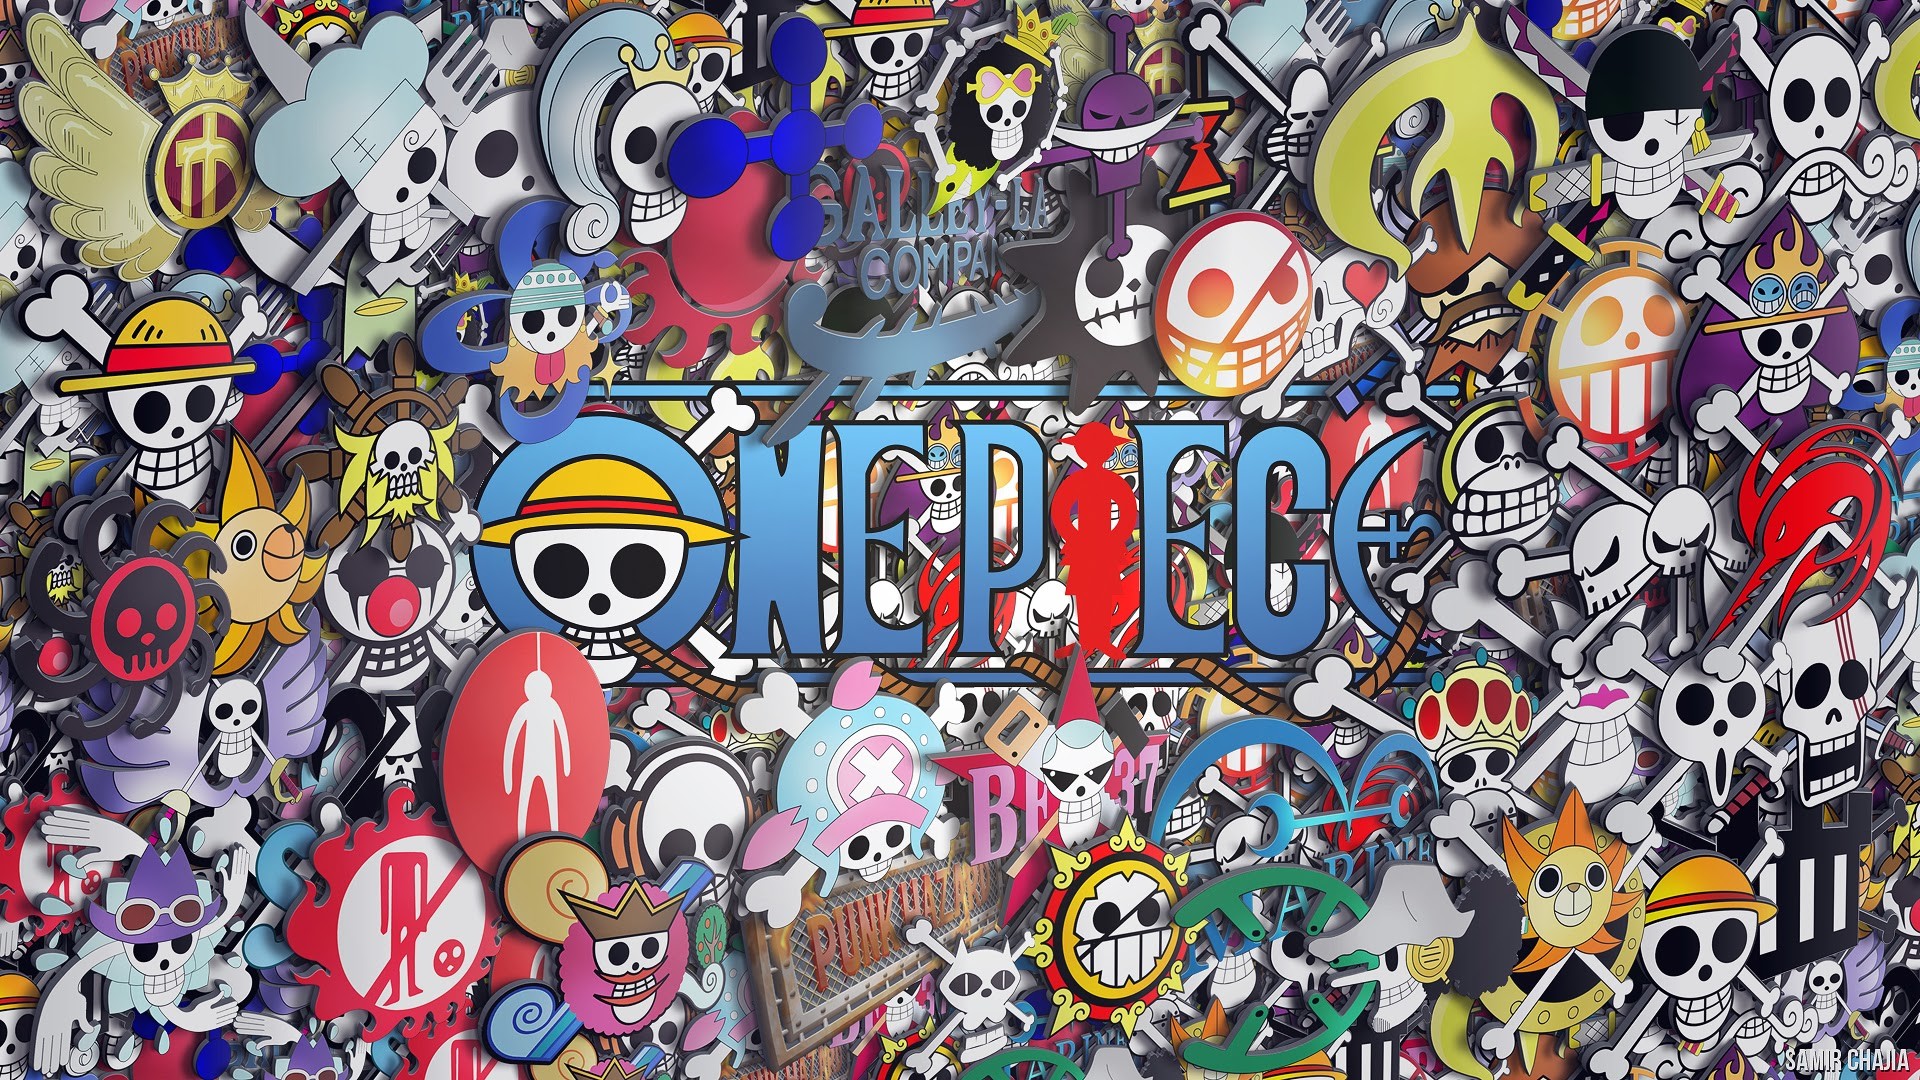 1920x1080 One Piece Pirate Logos Read One Piece Manga Online at MangaGrounds and join  our One Piece